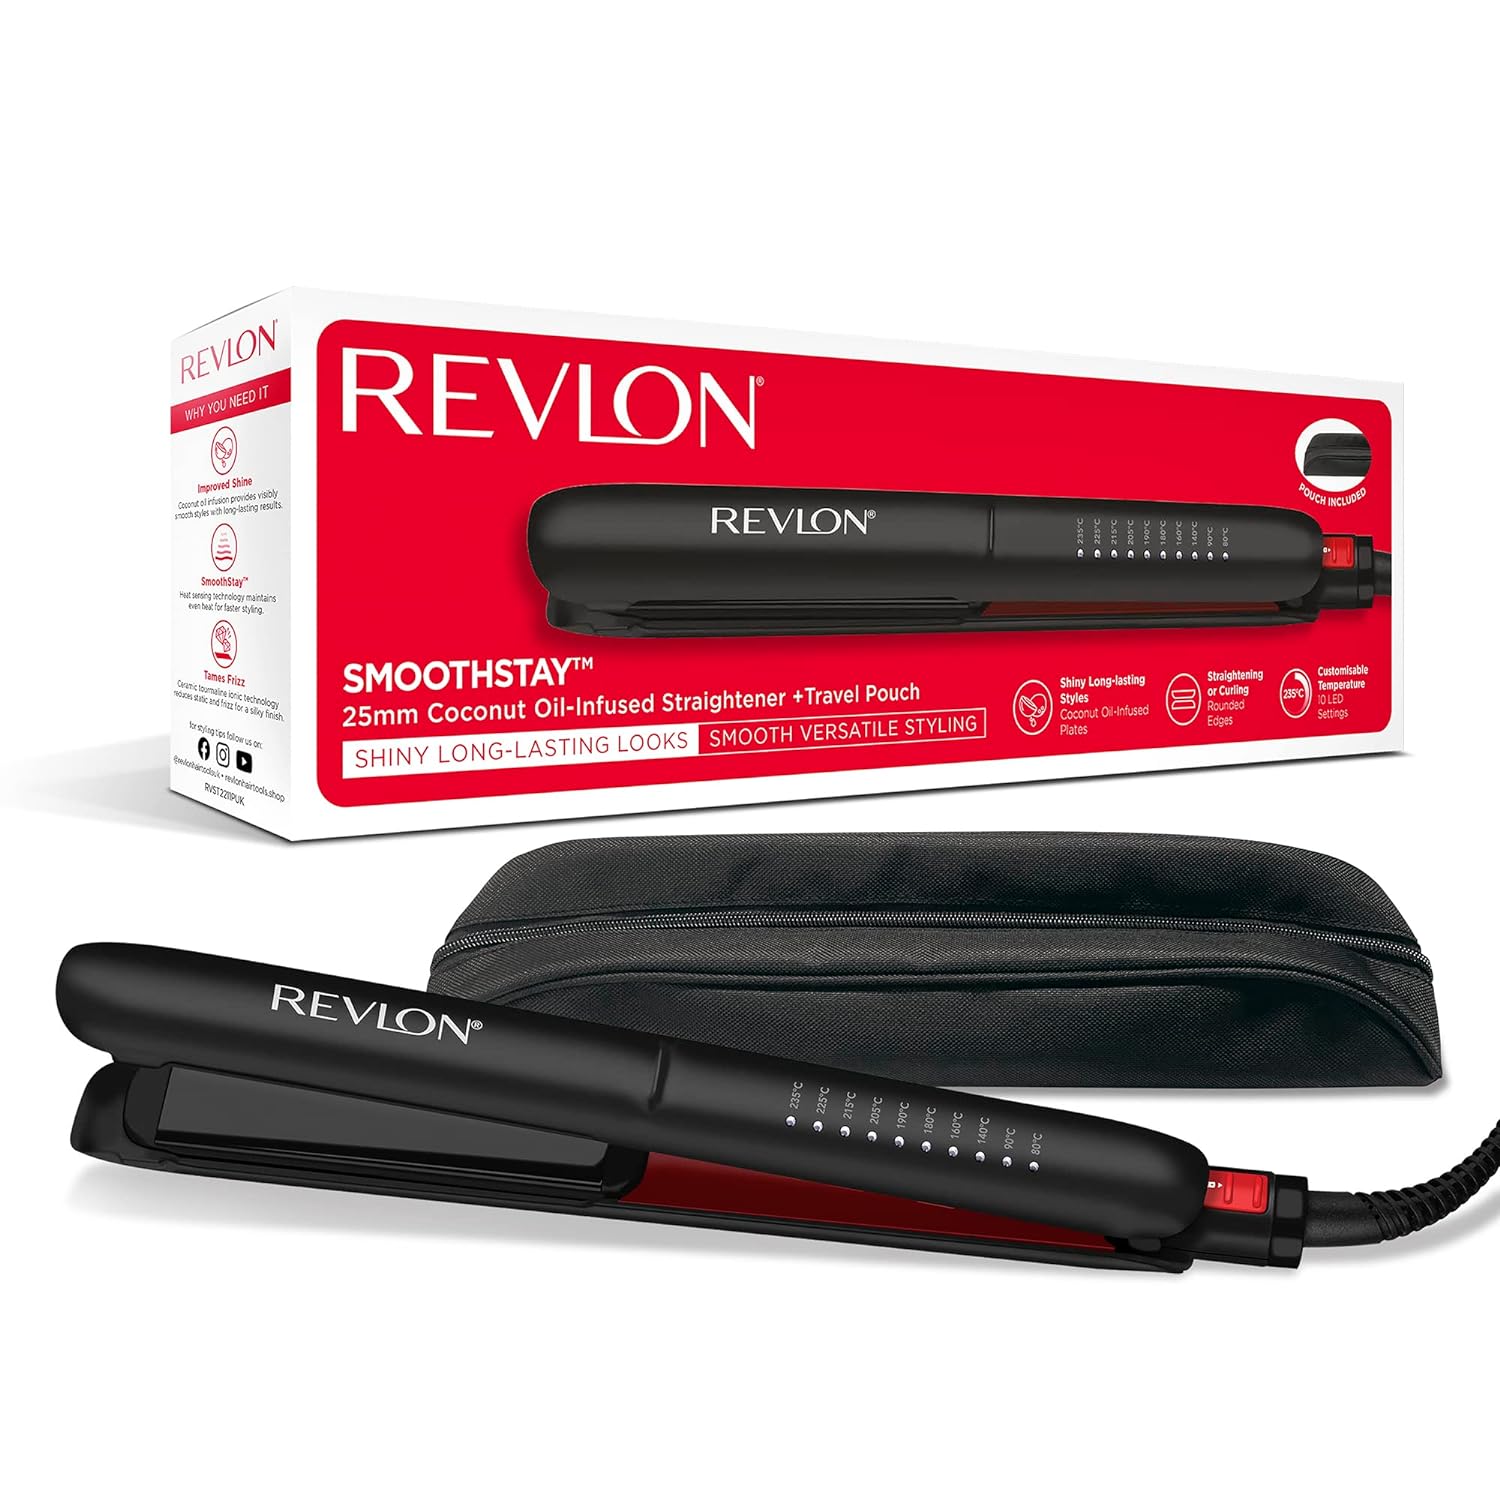 Revlon Smoothstay 25mm Hair Straightener With Coconut Oil Infusion + Travel Bag, RVST2211PE